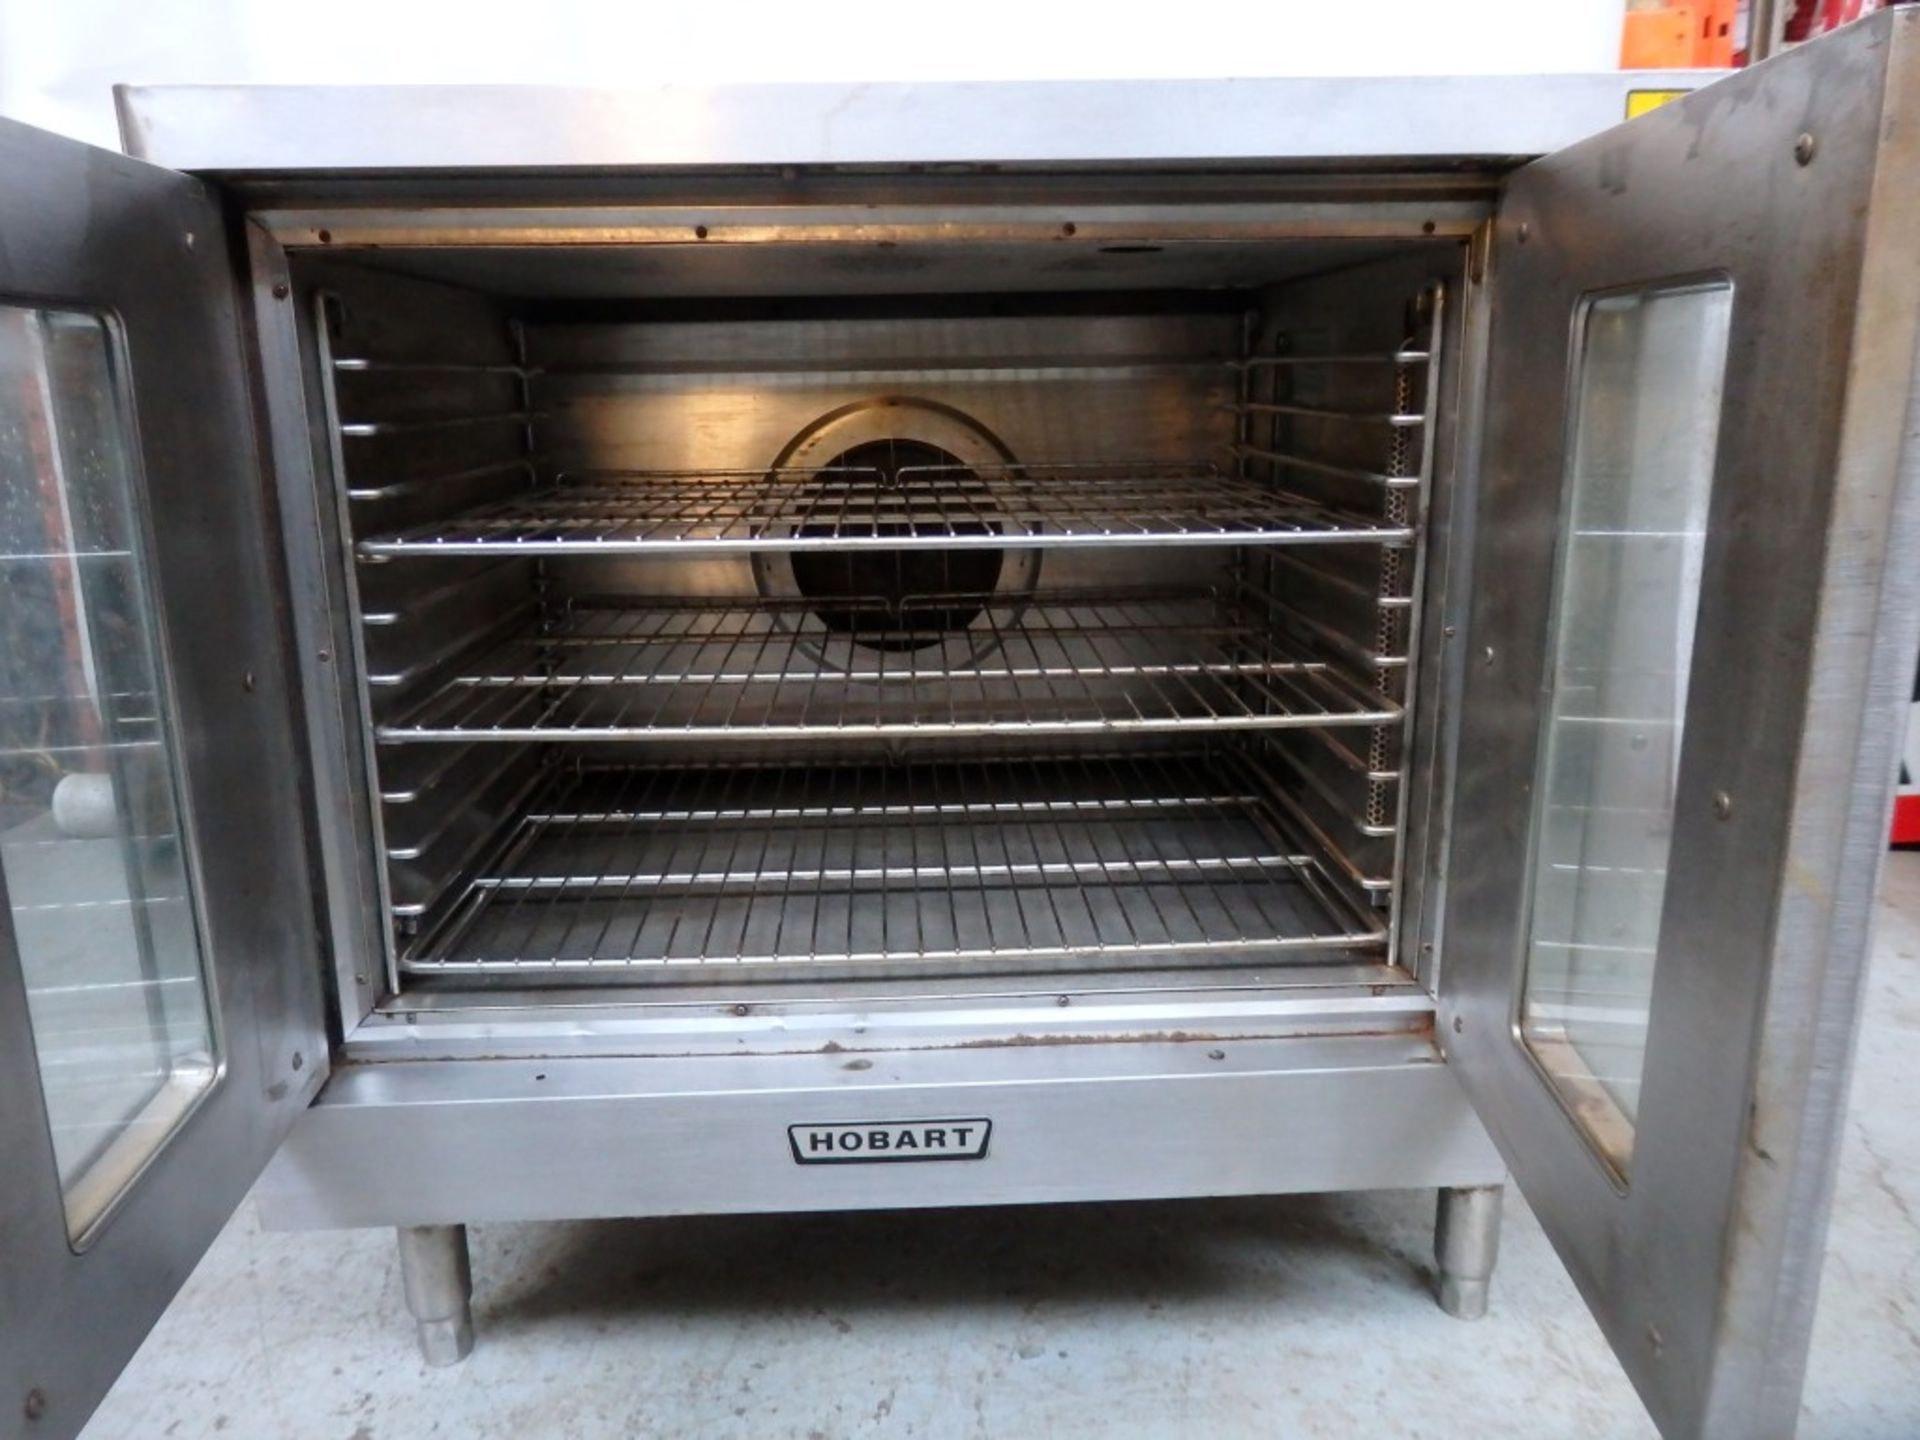 1 x Hobart Industrial Stainless Steel Oven With Temperature Control - Dimensions (Approx): H94 x W98 - Image 6 of 12